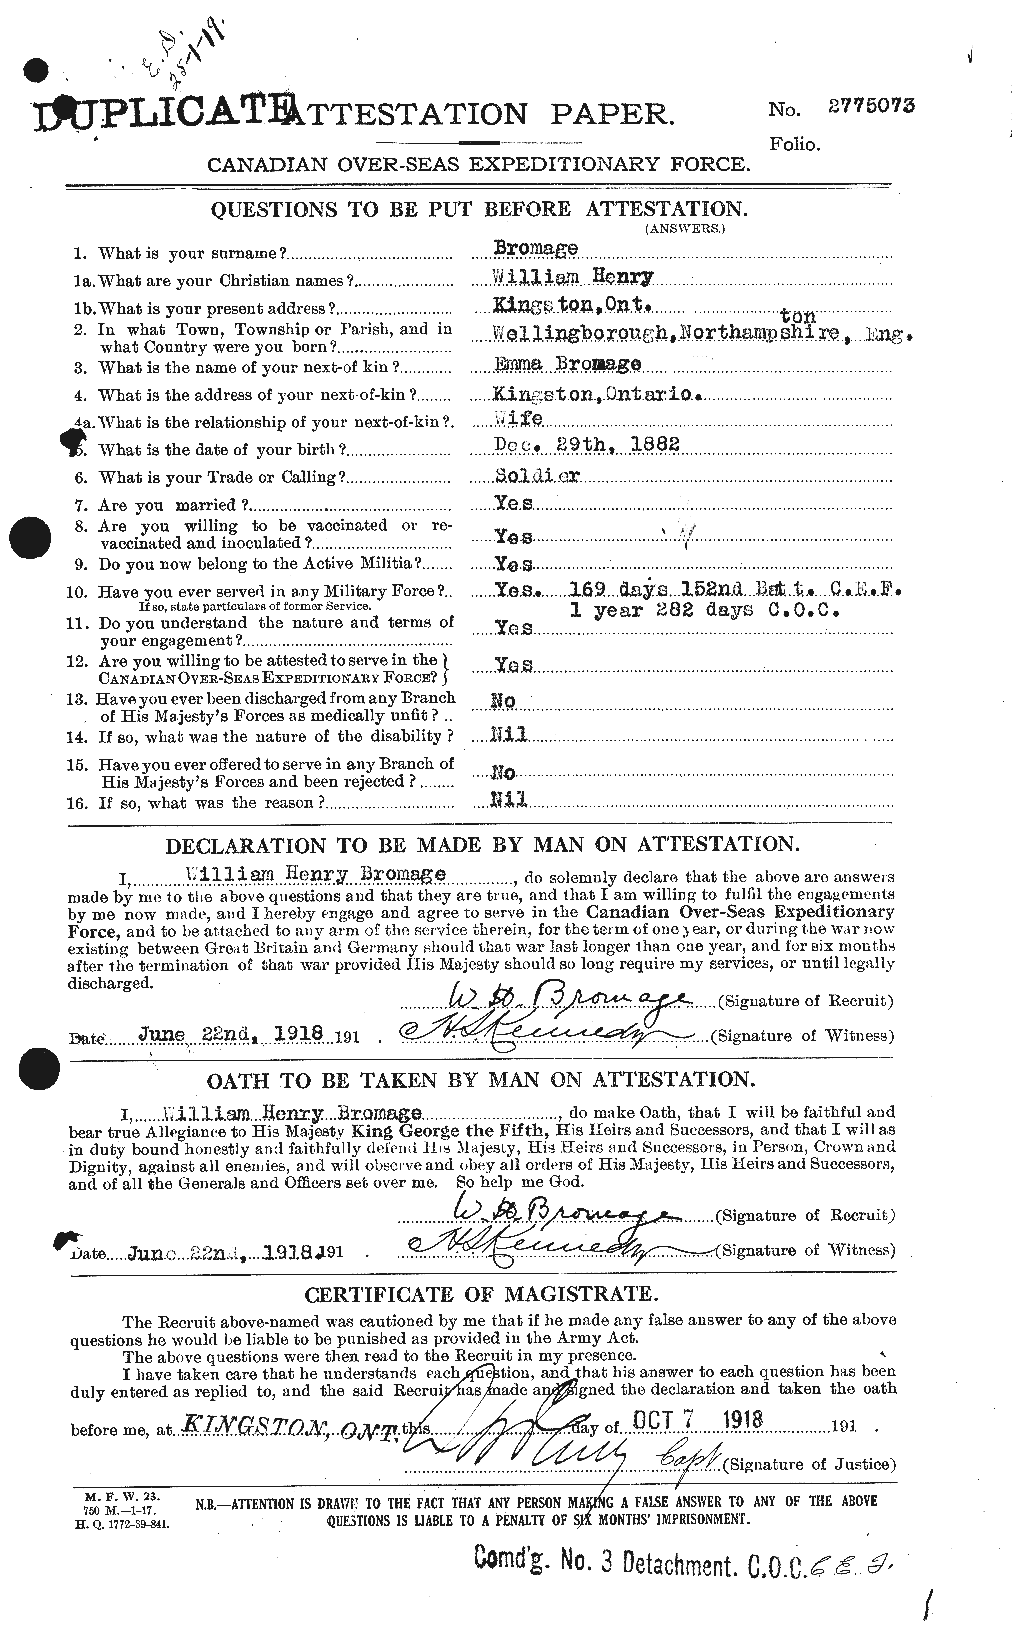 Personnel Records of the First World War - CEF 262121a